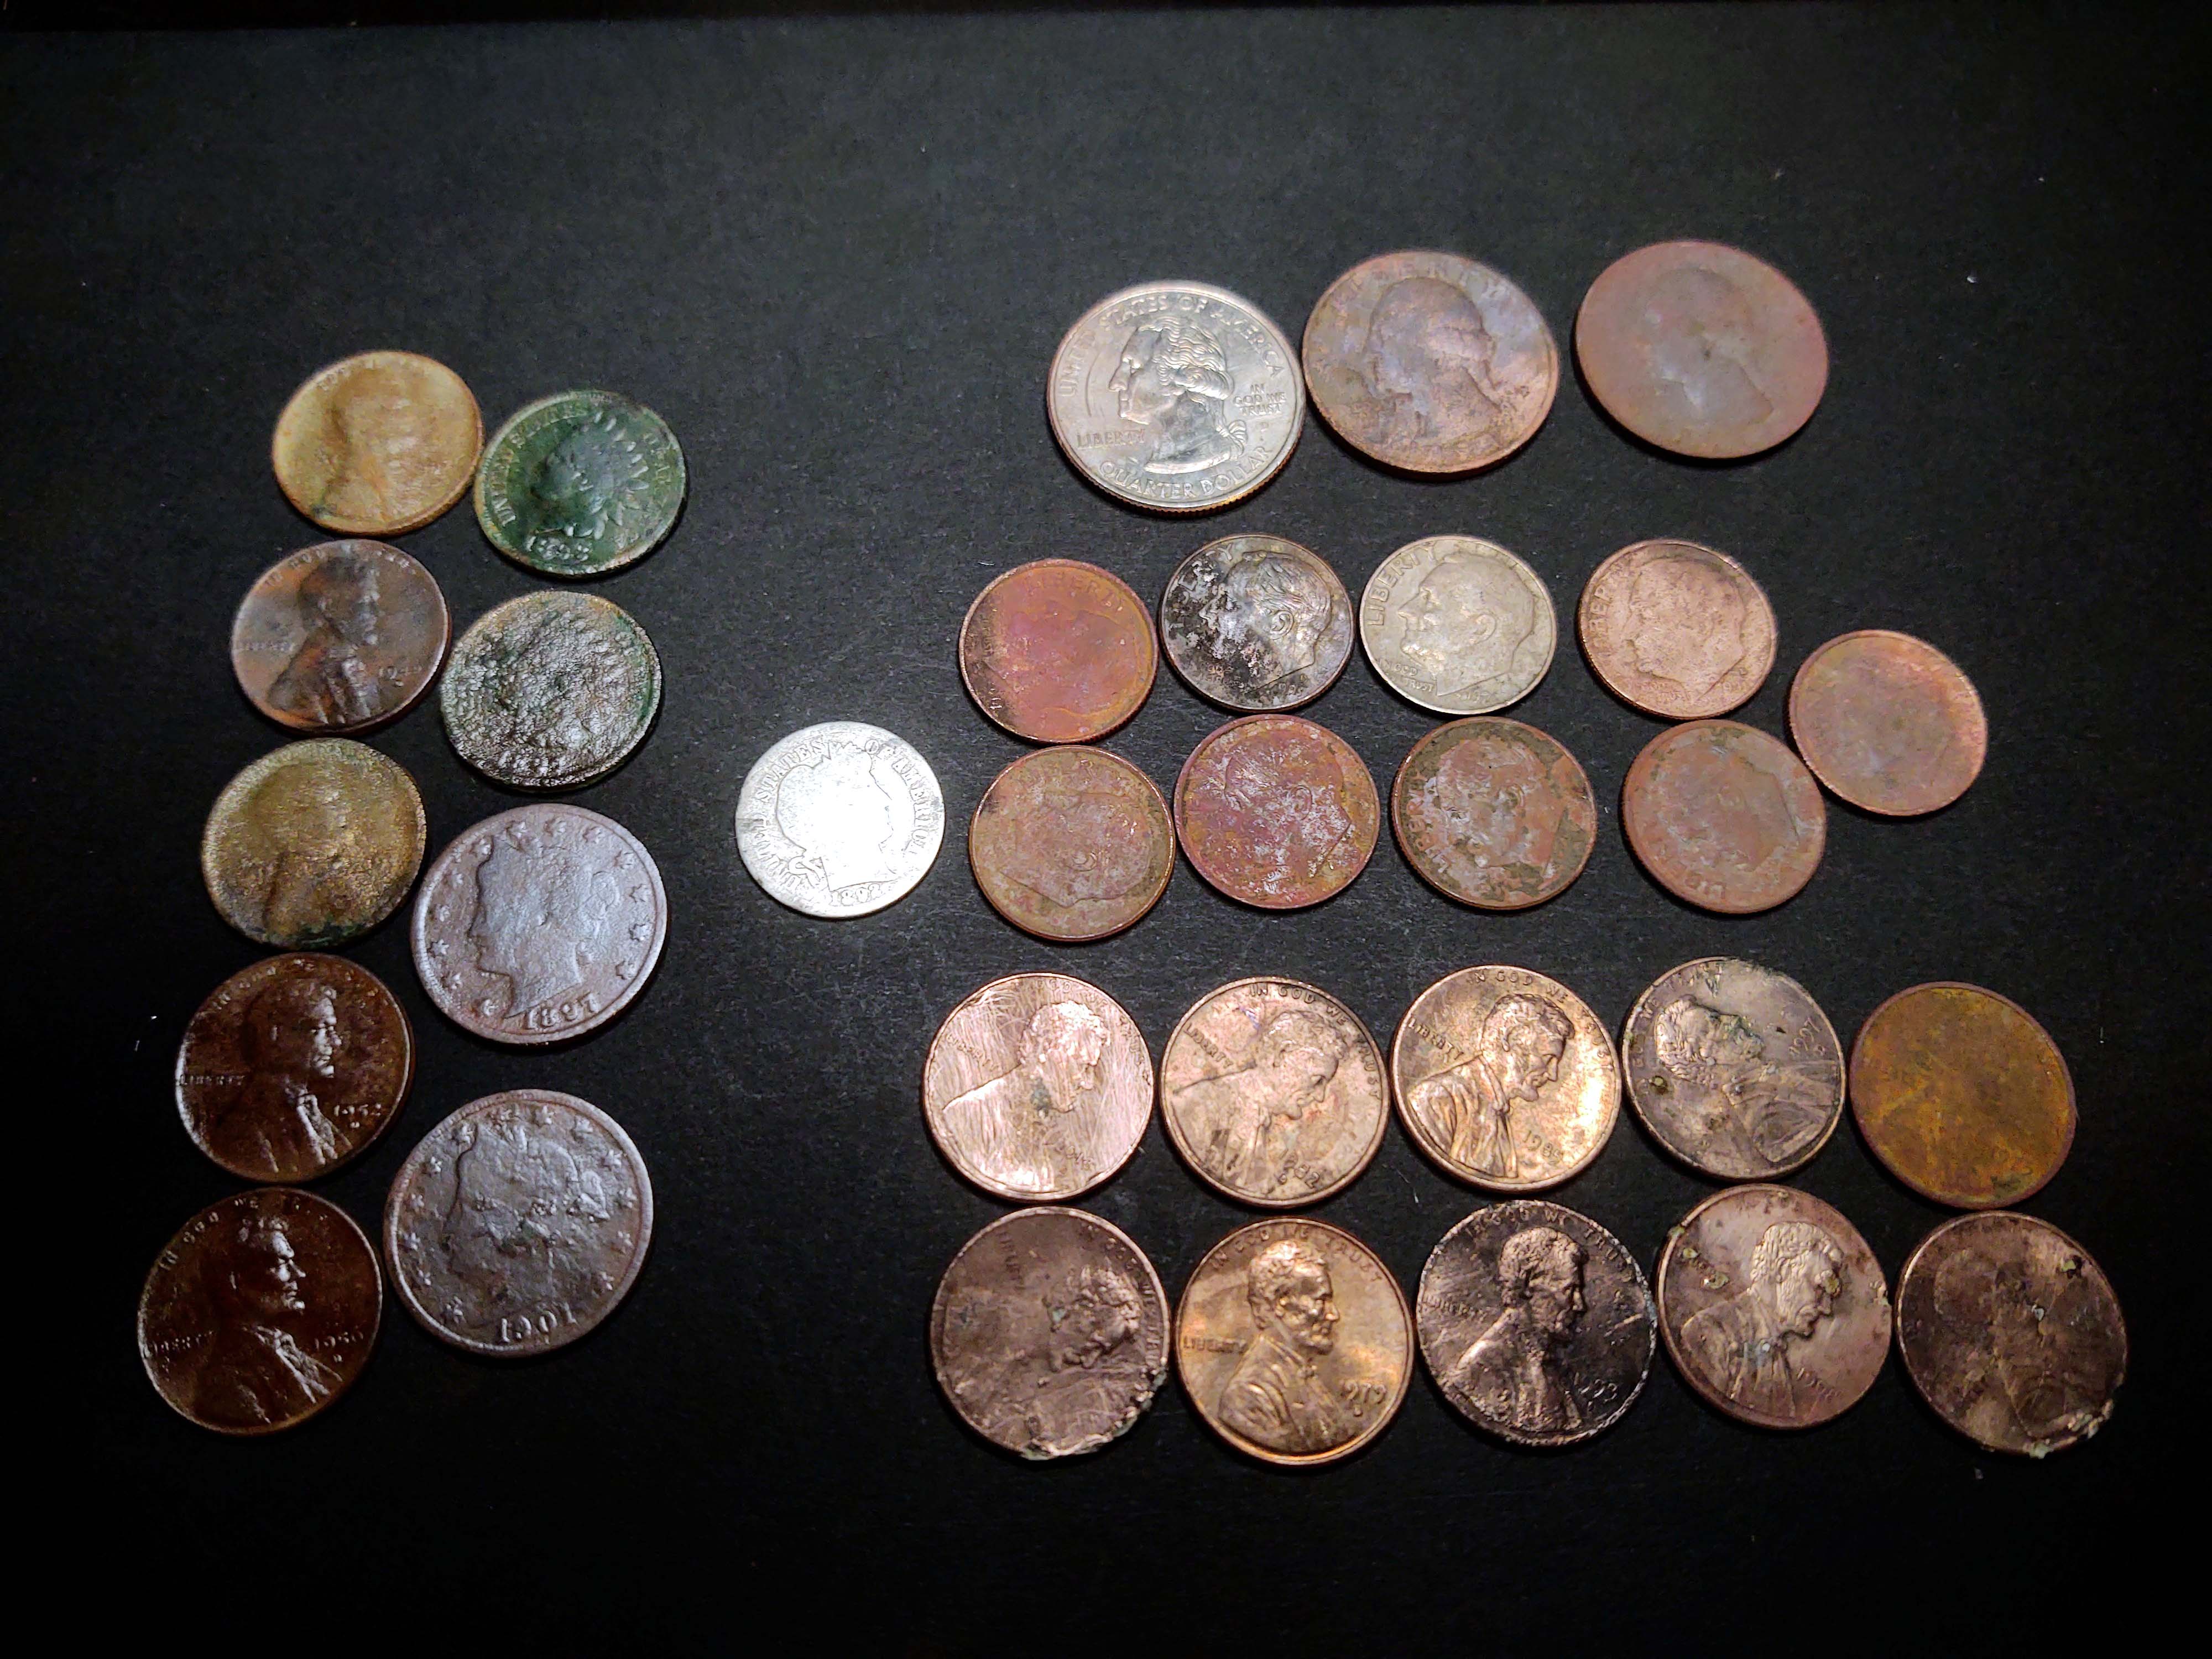 Metal Detector Finds Coins in "Hunted Out" Kansas Park - Silver and More!